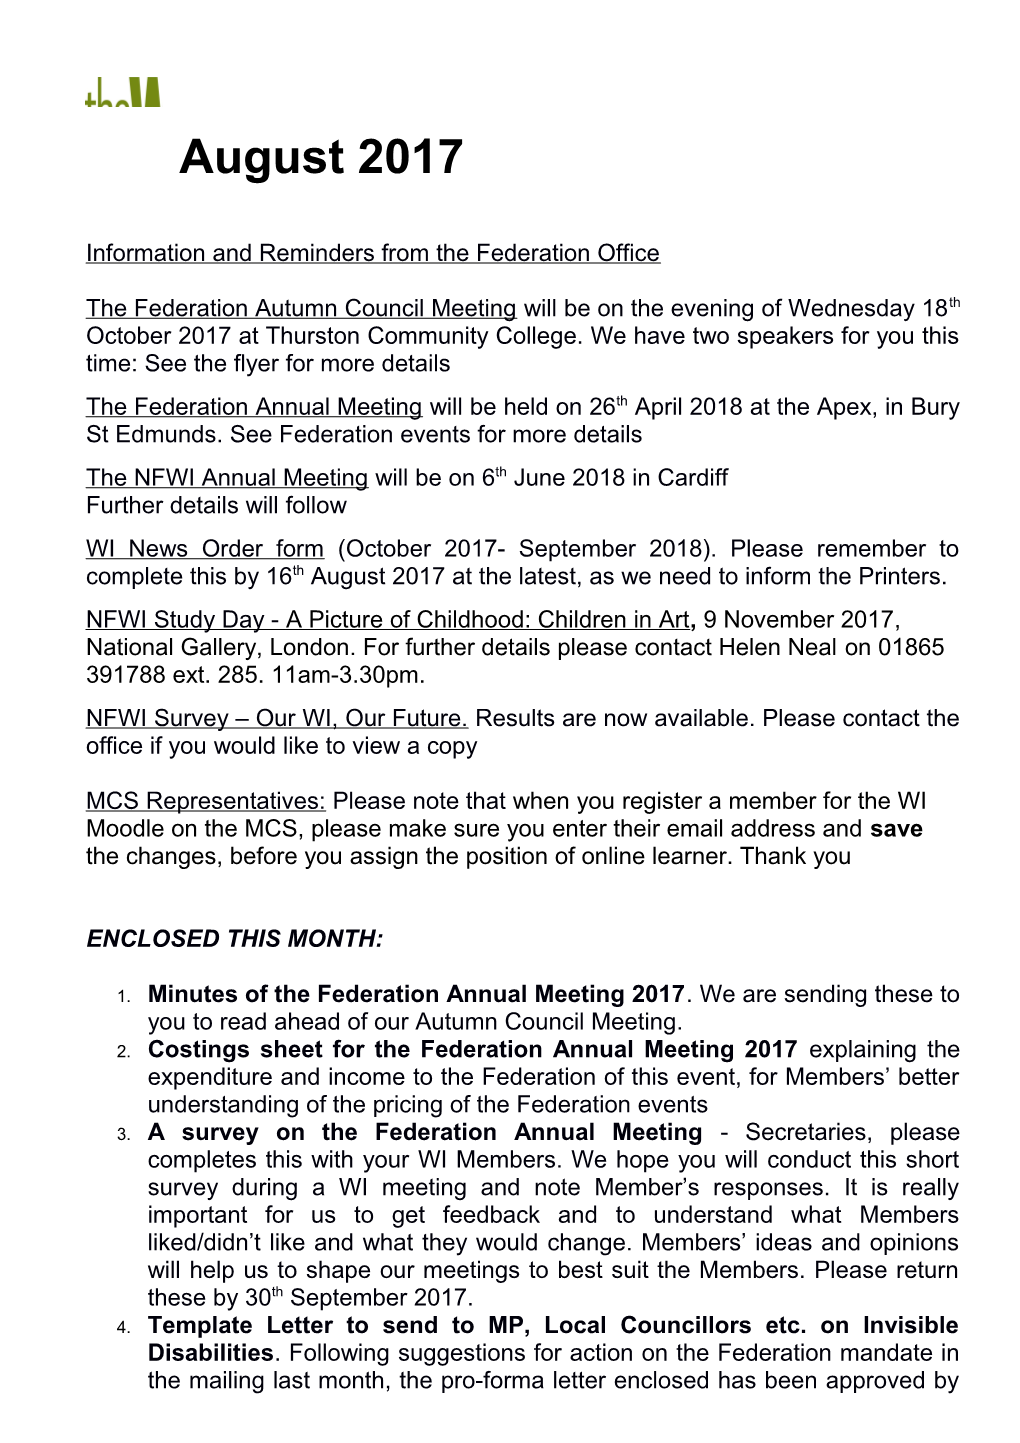 Information and Reminders from the Federation Office